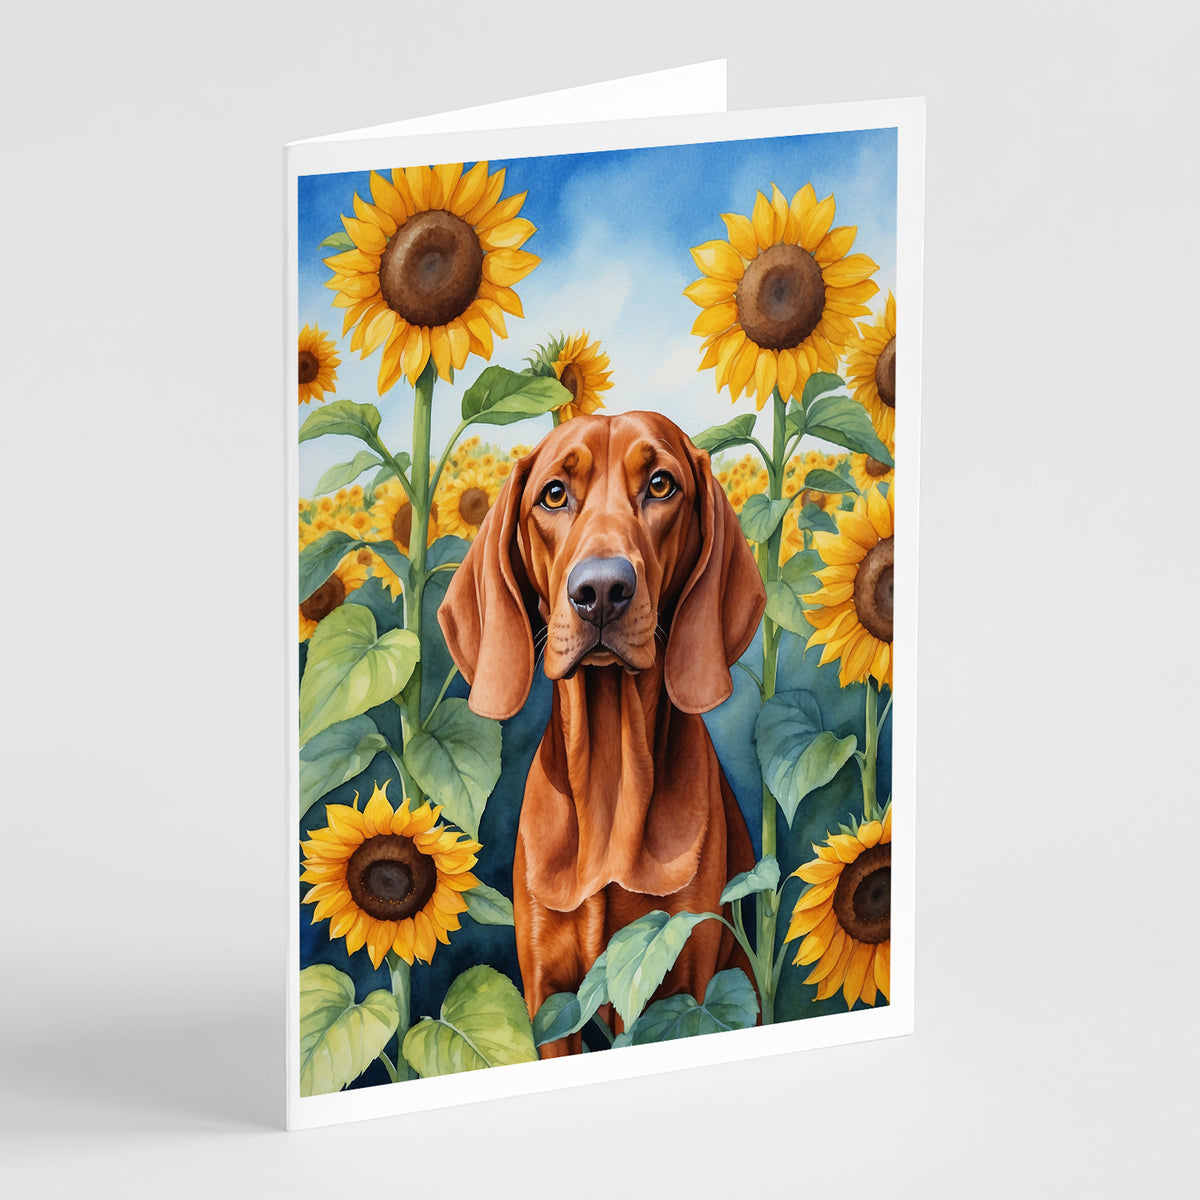 Buy this Redbone Coonhound in Sunflowers Greeting Cards Pack of 8